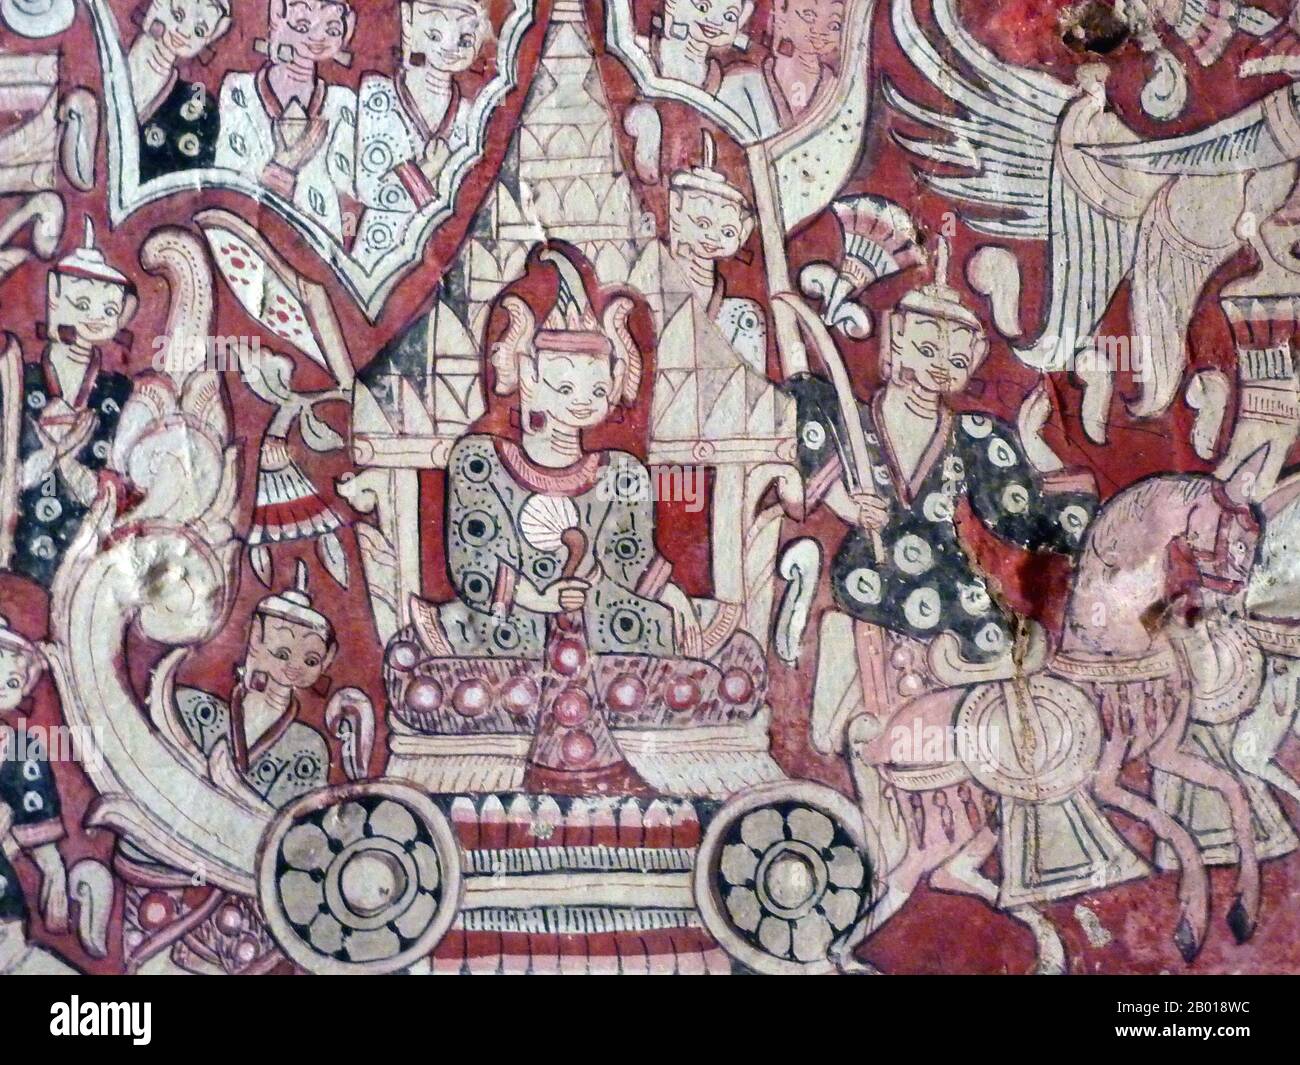 Burma/Myanmar: Mural of a Burmese king riding in a chariot, Phowintaung Caves, Monywa, 14th-18th century. Photo by Anandajoti Bhikkhu (CC BY 2.0 License).  Phowintaung (also variously romanised as Hpowindaung, Powintaung, Po Win Taung) is a Buddhist cave complex located approximately 25 kilometers west of Monywa and 10 kilometers southeast of Yinmabin, in Yinmabin Township, Monywa District, Sagaing Region, Northern Burma (Myanmar). It is located on the western bank of the Chindwin River. The name of the complex means 'Mountain of Isolated Solitary Meditation'. Stock Photo